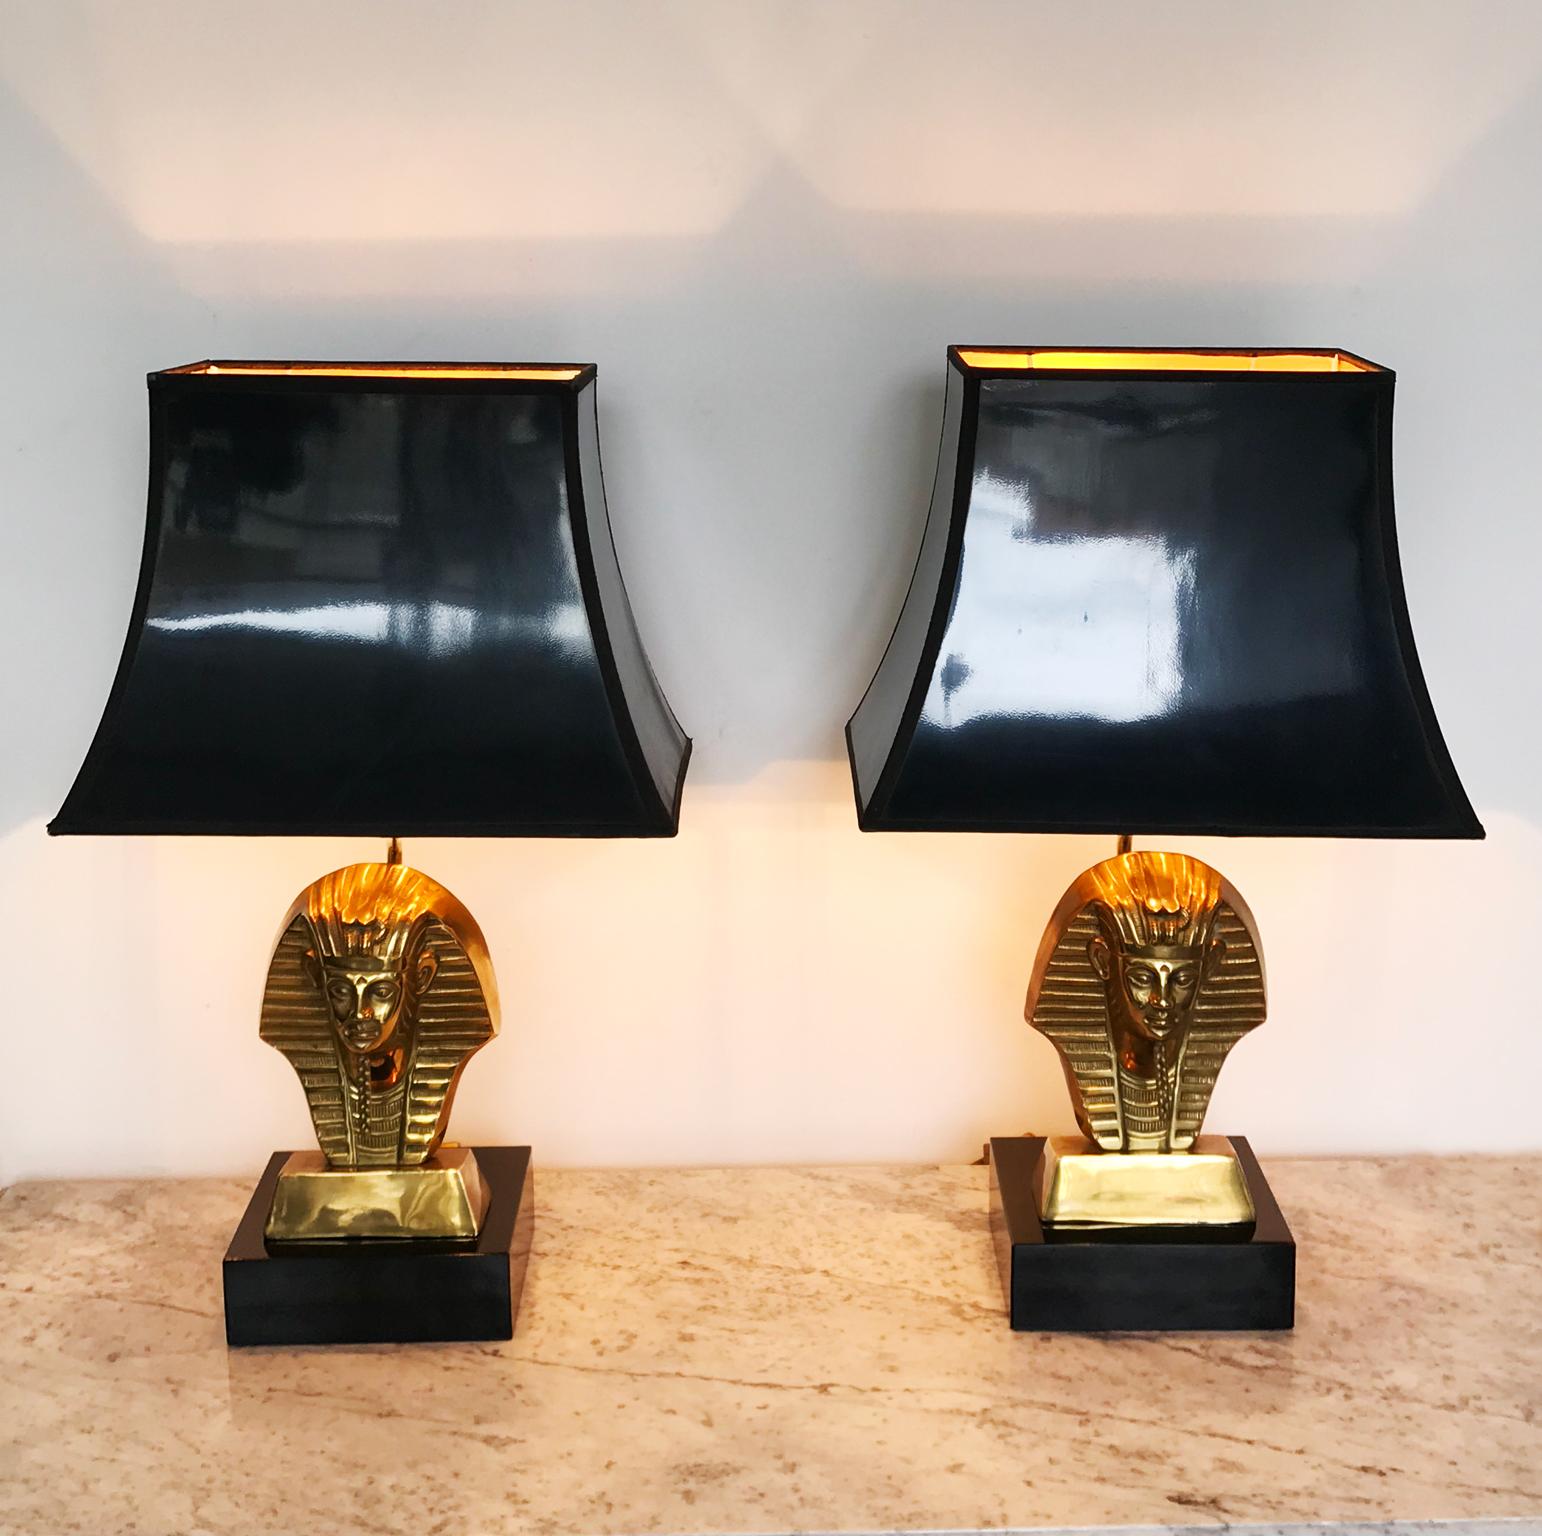 Pair of Pharaoh King table lamps in the Deknudt, Hollywood Regency style, circa 1960s. These have the original black shades.

Height including shade: 58cm
Height without shade: 38cm
Width including shade: 35cm
Width of base: 17cm
Height of